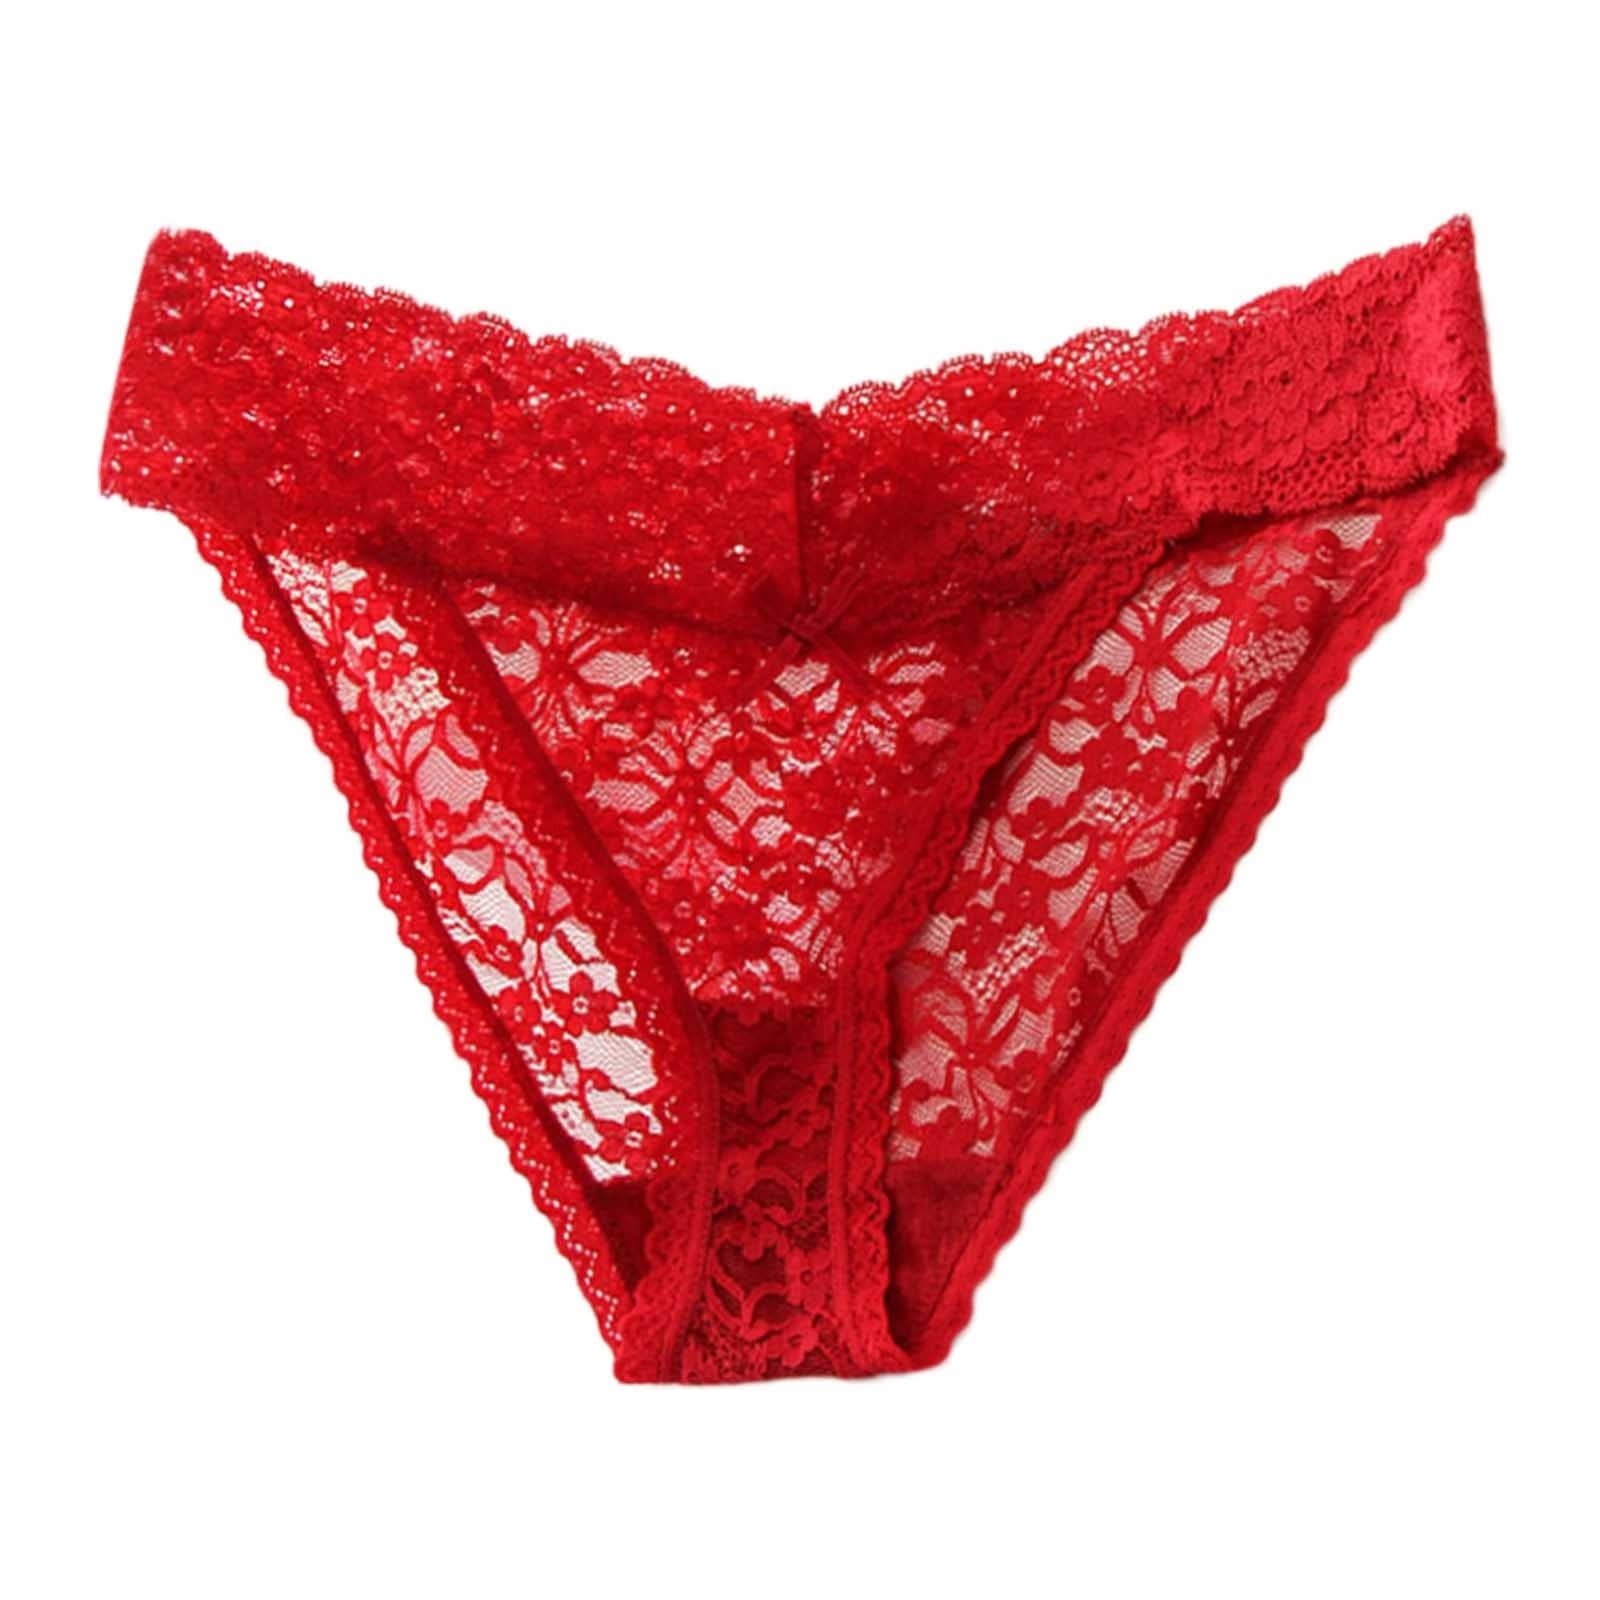 Sexy Red Strappy Plus Comfy High Waisted Size 8-18 Underwear Panties Undies